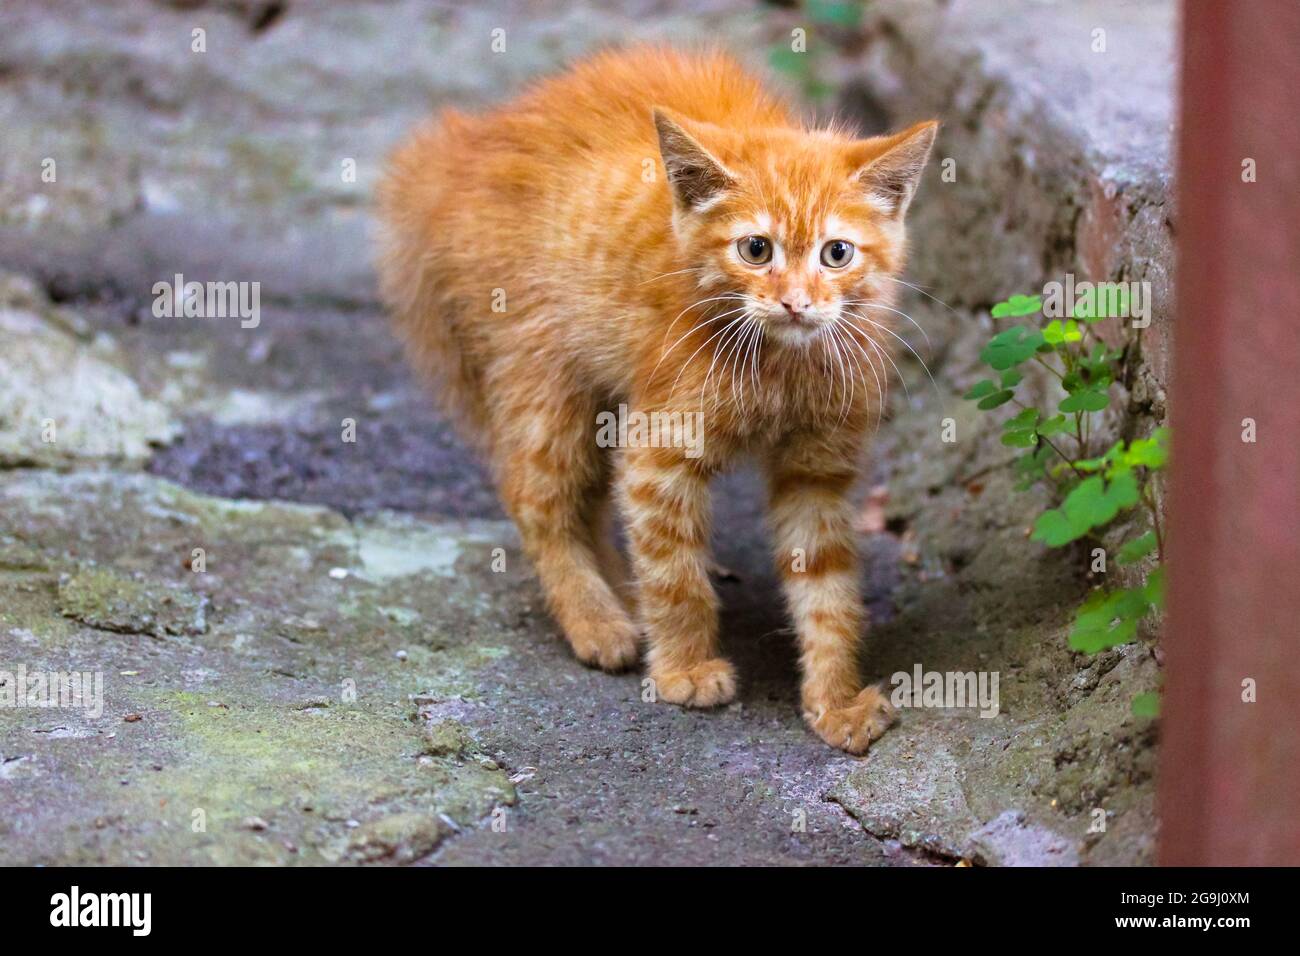 A frightened stray ginger kitten on a street. A little fluffy redheaded kitten arches its back, fur stand on end. A cat is annoyed, an enraged animal. Stock Photo